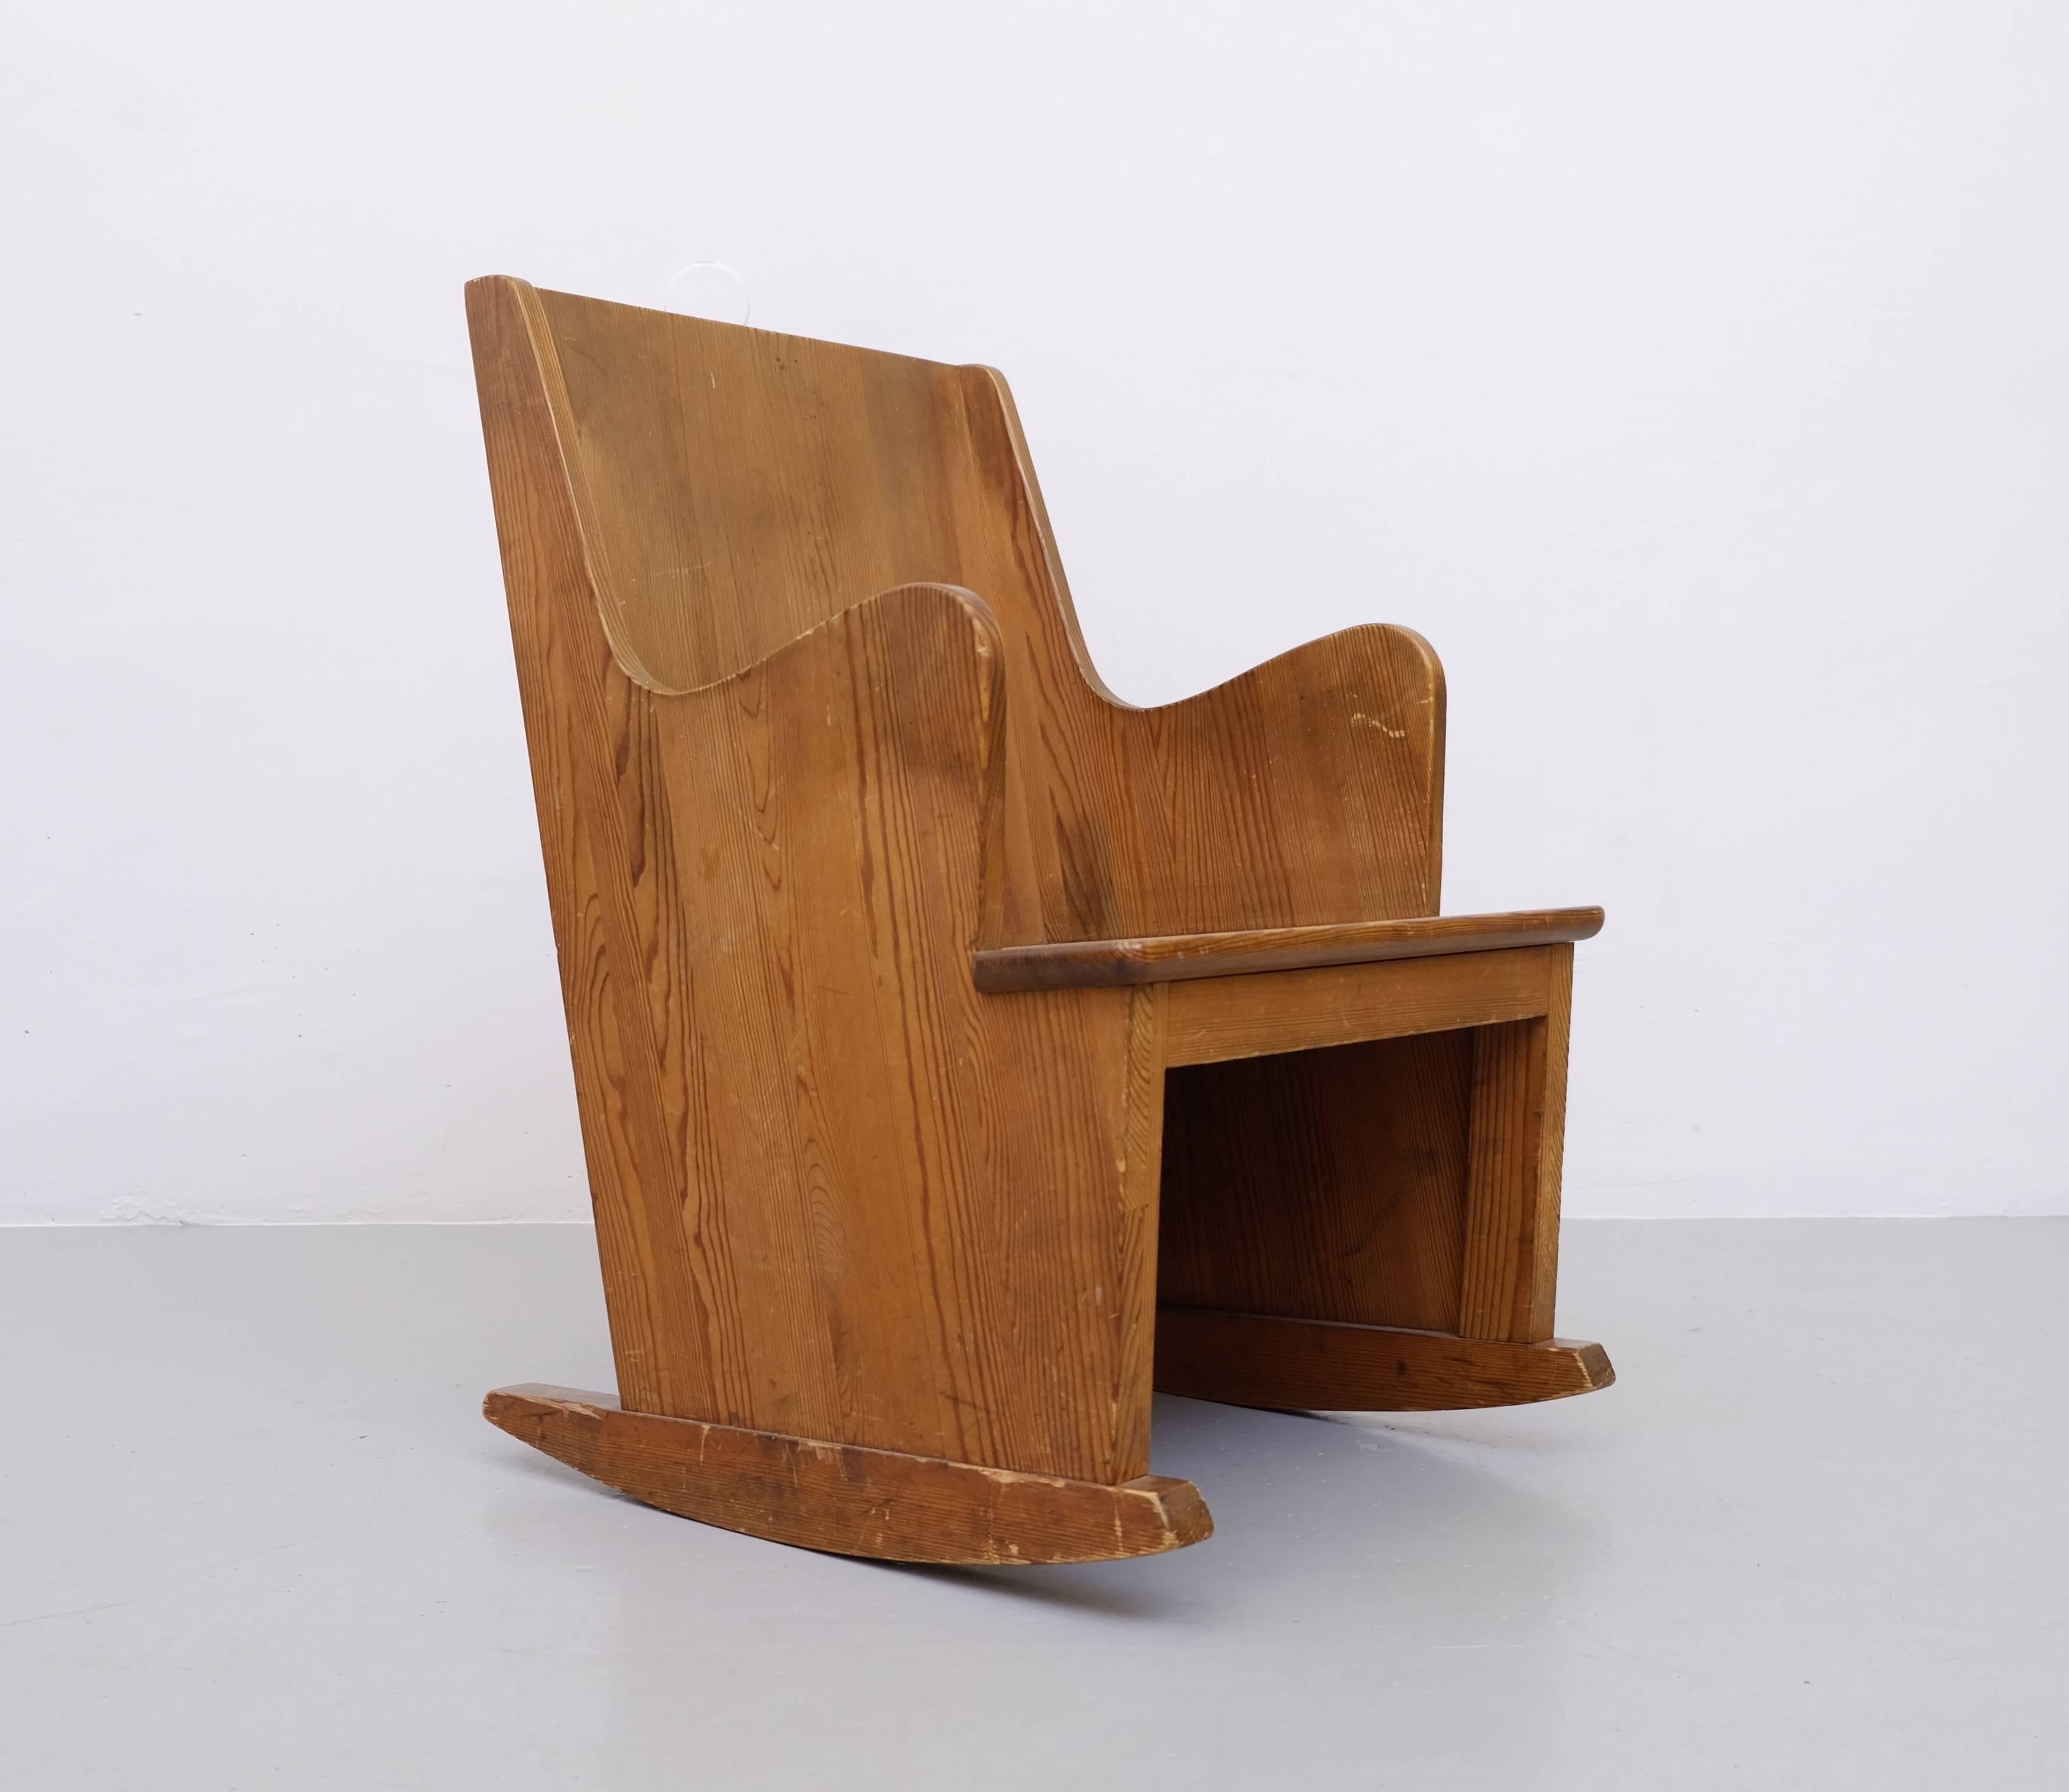 This rare rocking chair is part of the 'Lovo¨' series designed by Axel Einar Hjorth for the high-end Stockholm-based Nordiska Kompaniet department store in 1932. Executed in pinewood.

Free global front door shipping!